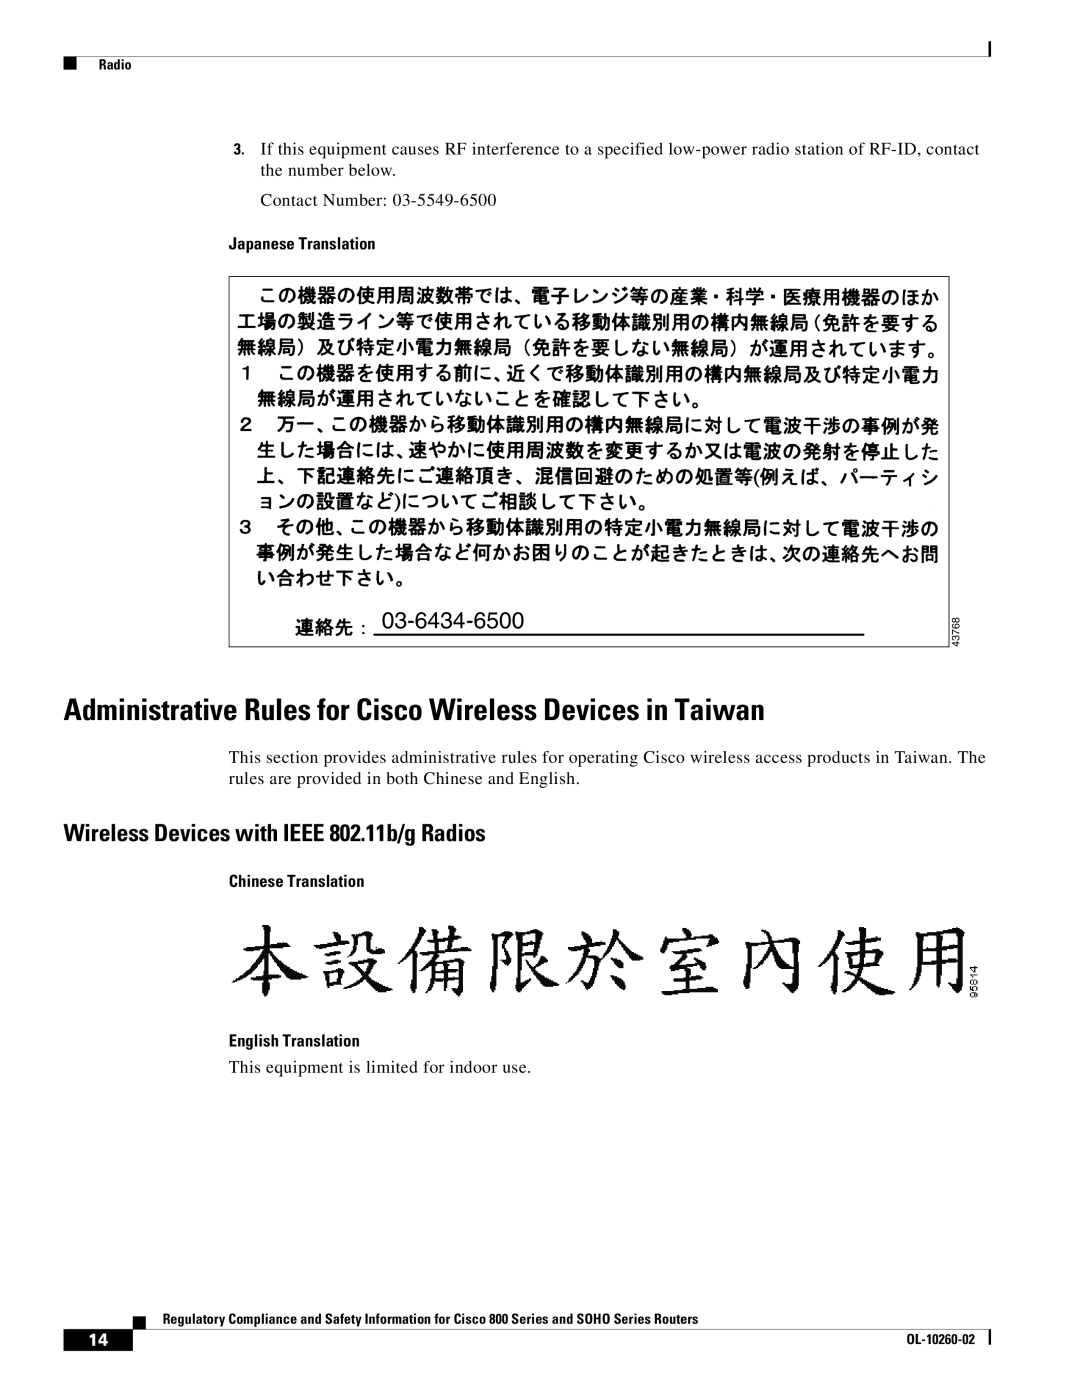 Cisco Systems SOHO Series manual Administrative Rules for Cisco Wireless Devices in Taiwan, 03-6434-6500 